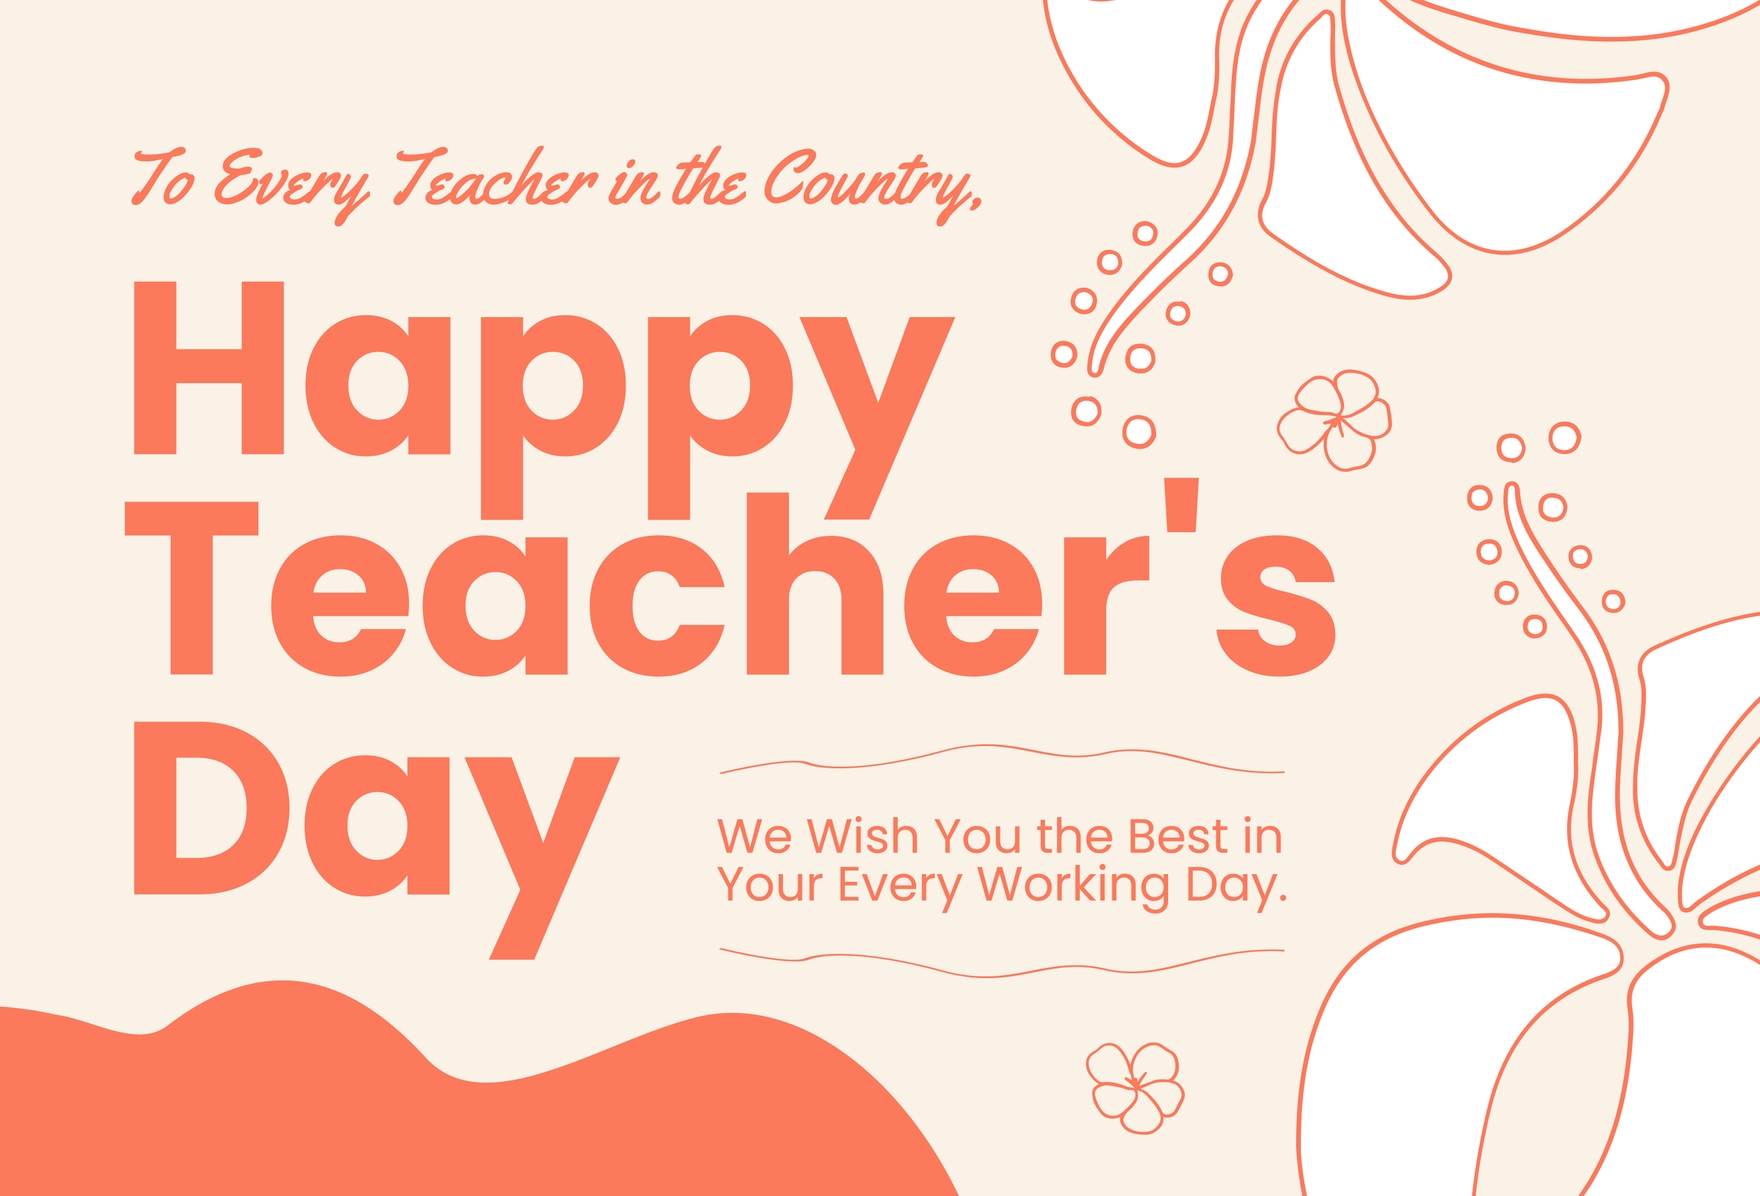 Teacher's Day Message Wishes in Word, Illustrator, PSD